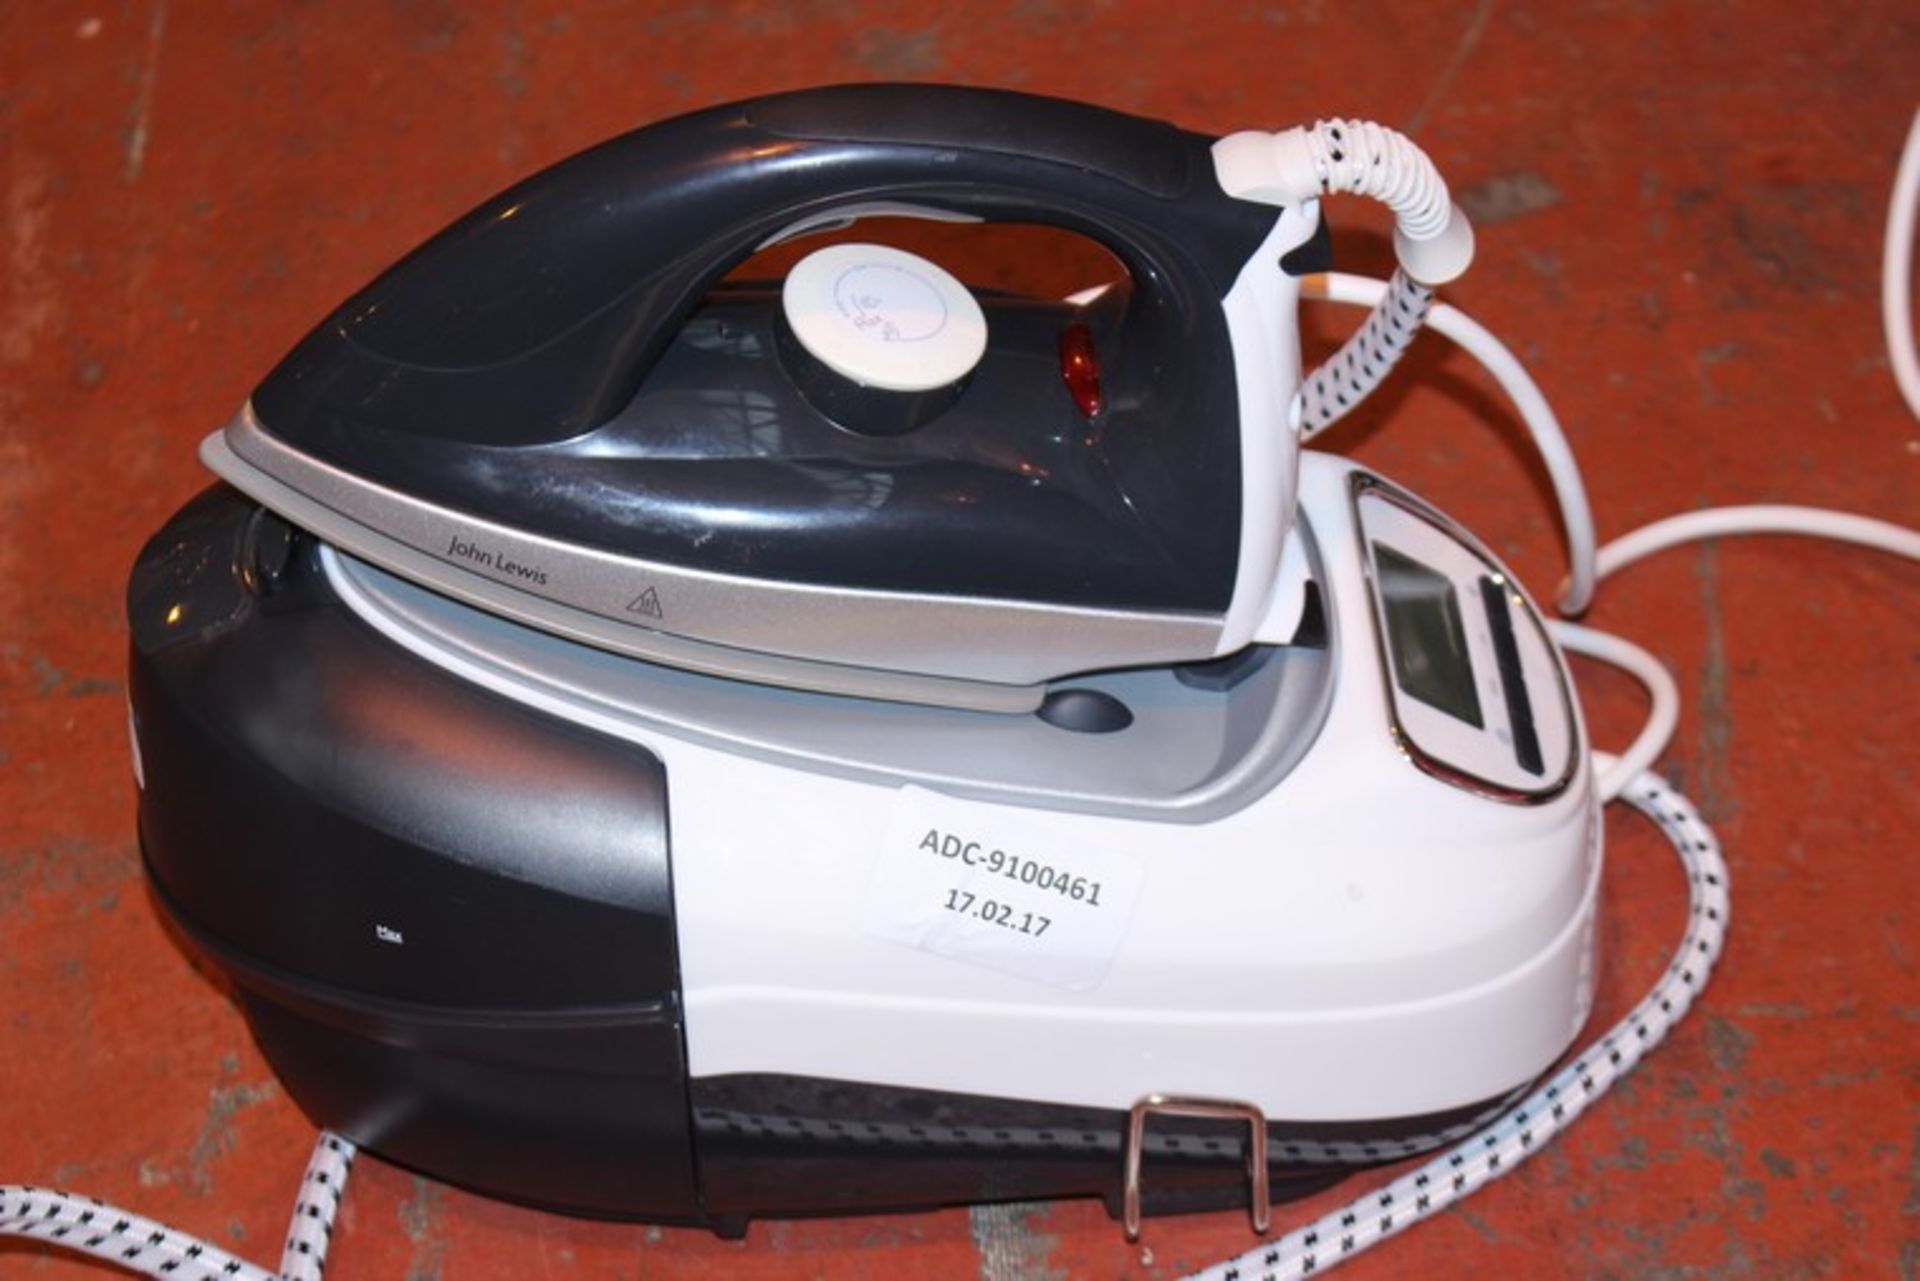 1 x UNBOXED POWER STEAM GENERATING IRON RRP £100 (17.2.17) *PLEASE NOTE THAT THE BID PRICE IS